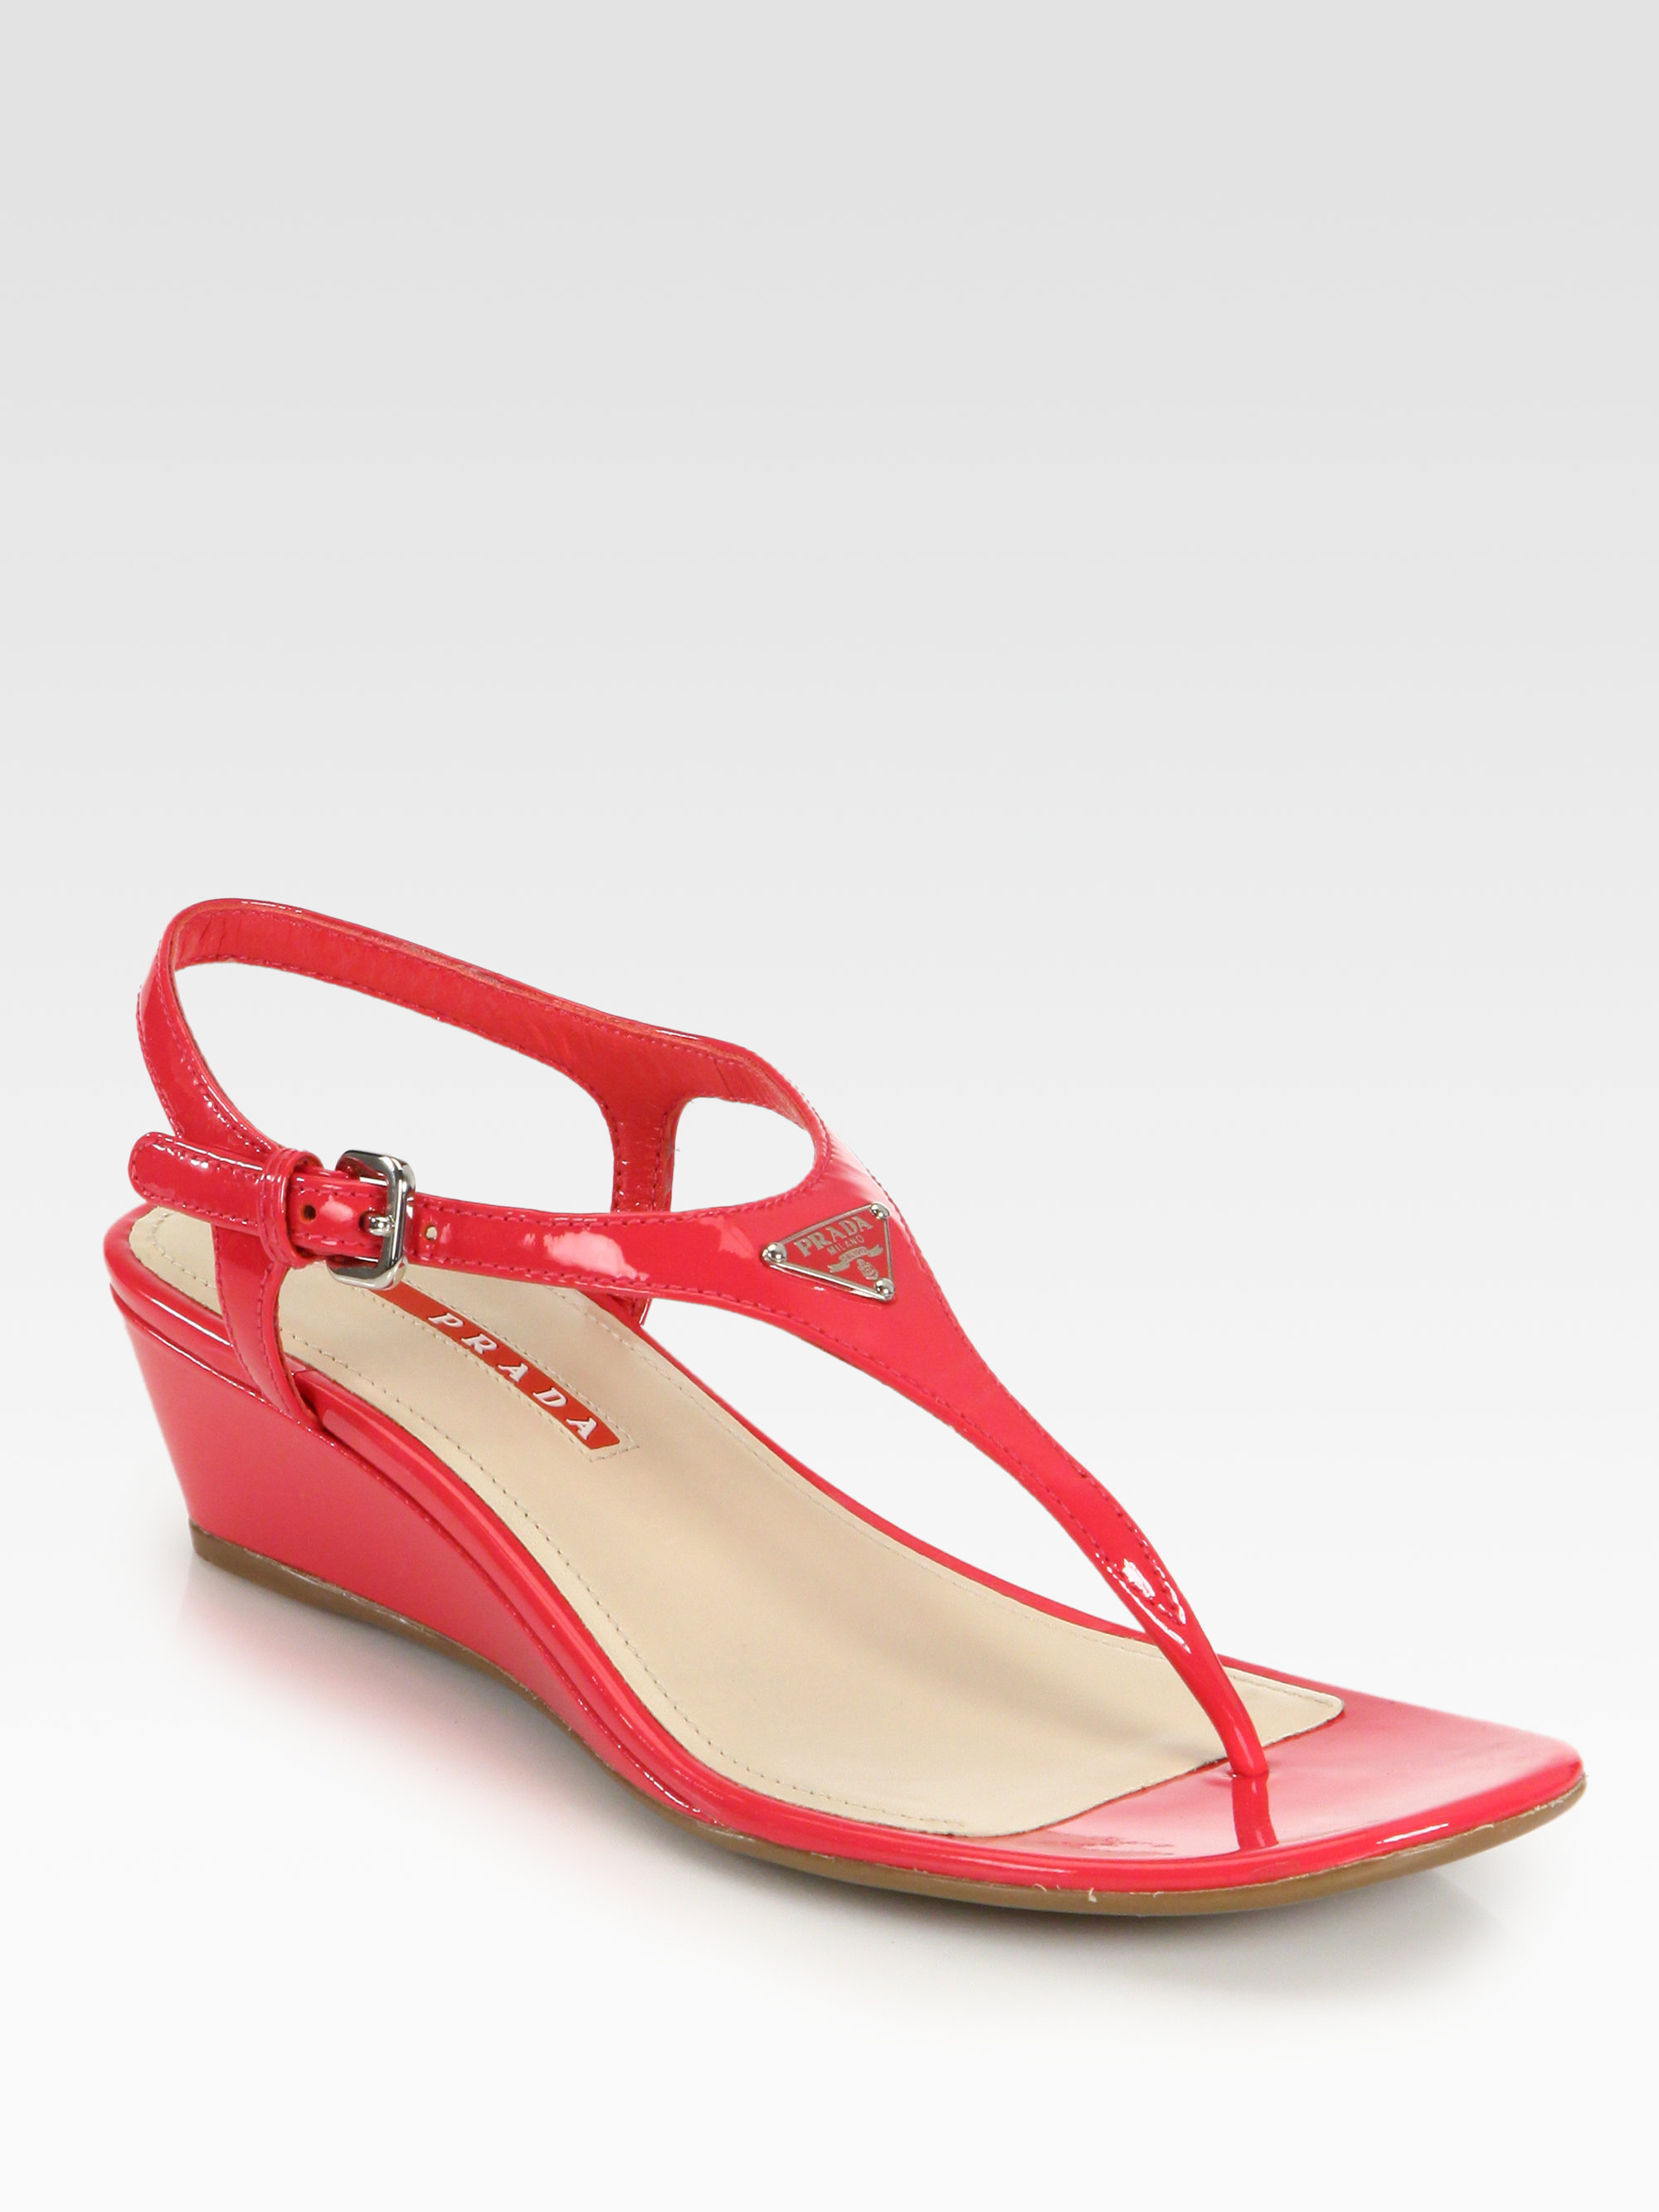 Prada Patent Leather Thong Wedge Sandals in Red (fuxia-fuchsia) | Lyst  